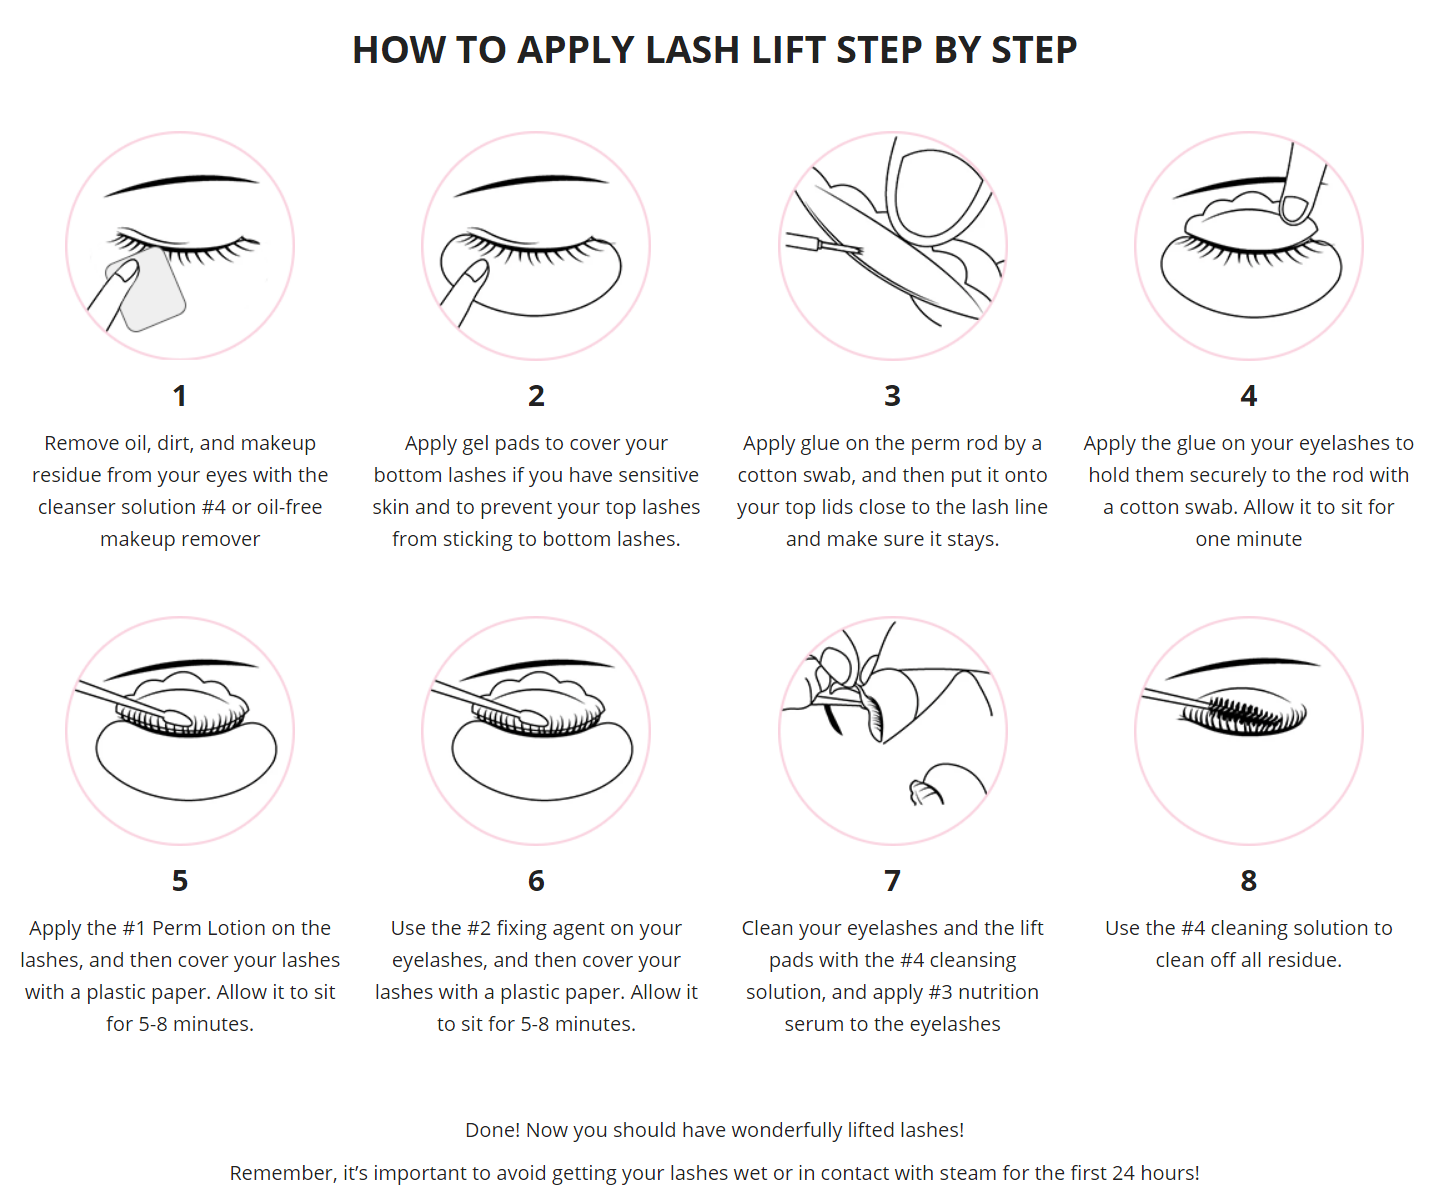 HOW TO APPLY LASH LIFT STEP BY STEP